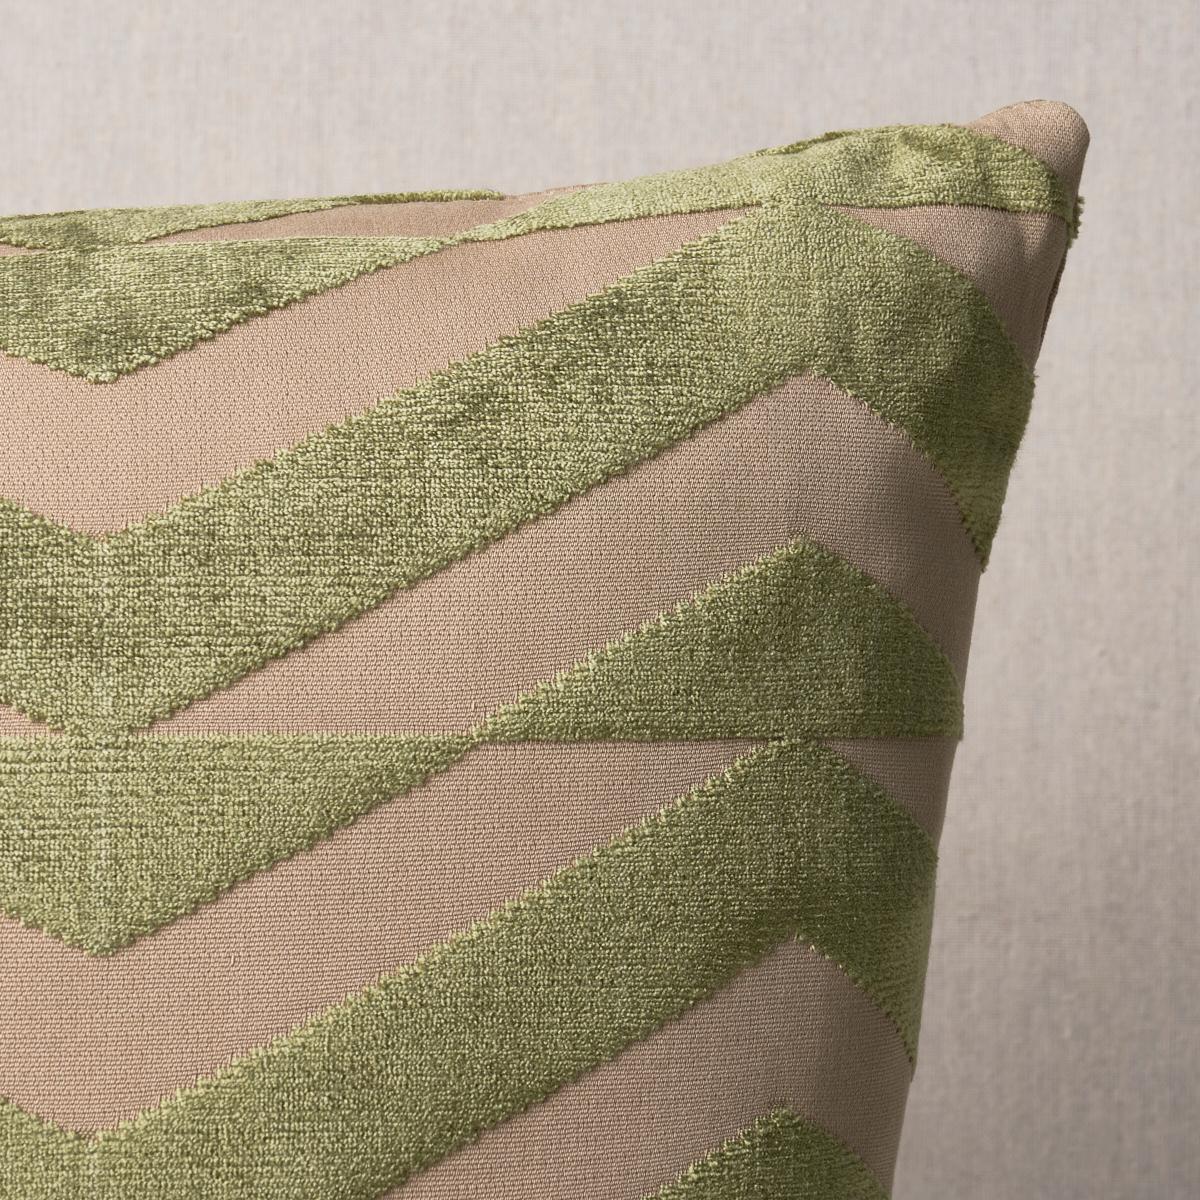 This pillow features Broken Chevron Cut Velvet by Miles Redd for Schumacher with a knife edge finish. Miles Redd was so charmed by a painted staircase photographed from above that he recreated it as olive-on-khaki-colored Broken Chevron Velvet, a